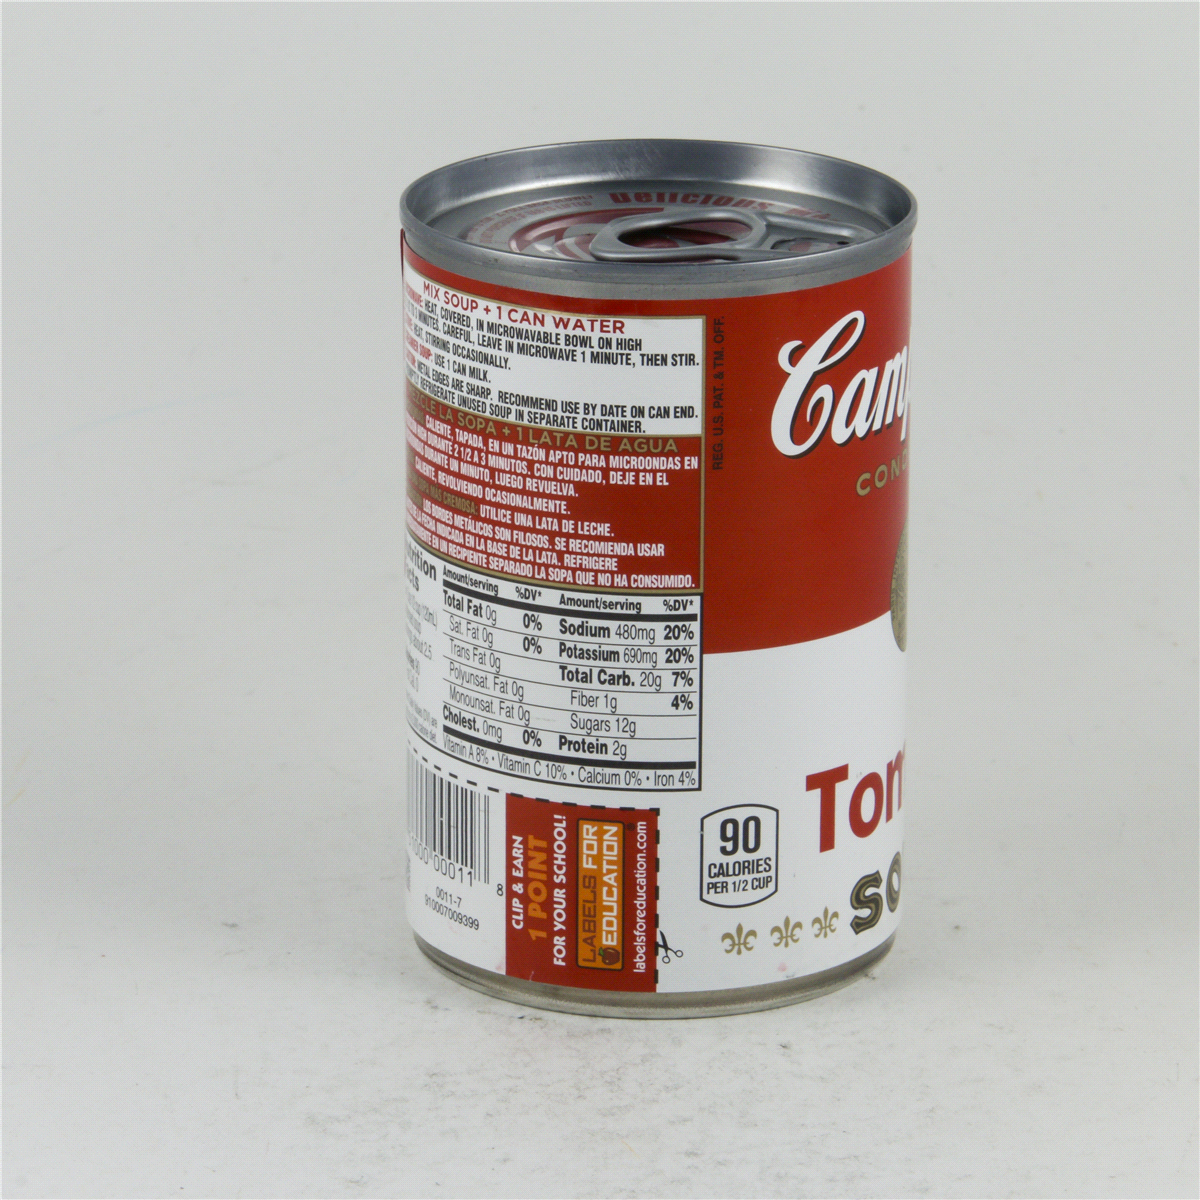 slide 5 of 110, Campbell's Condensed Tomato Soup, 10.75 oz